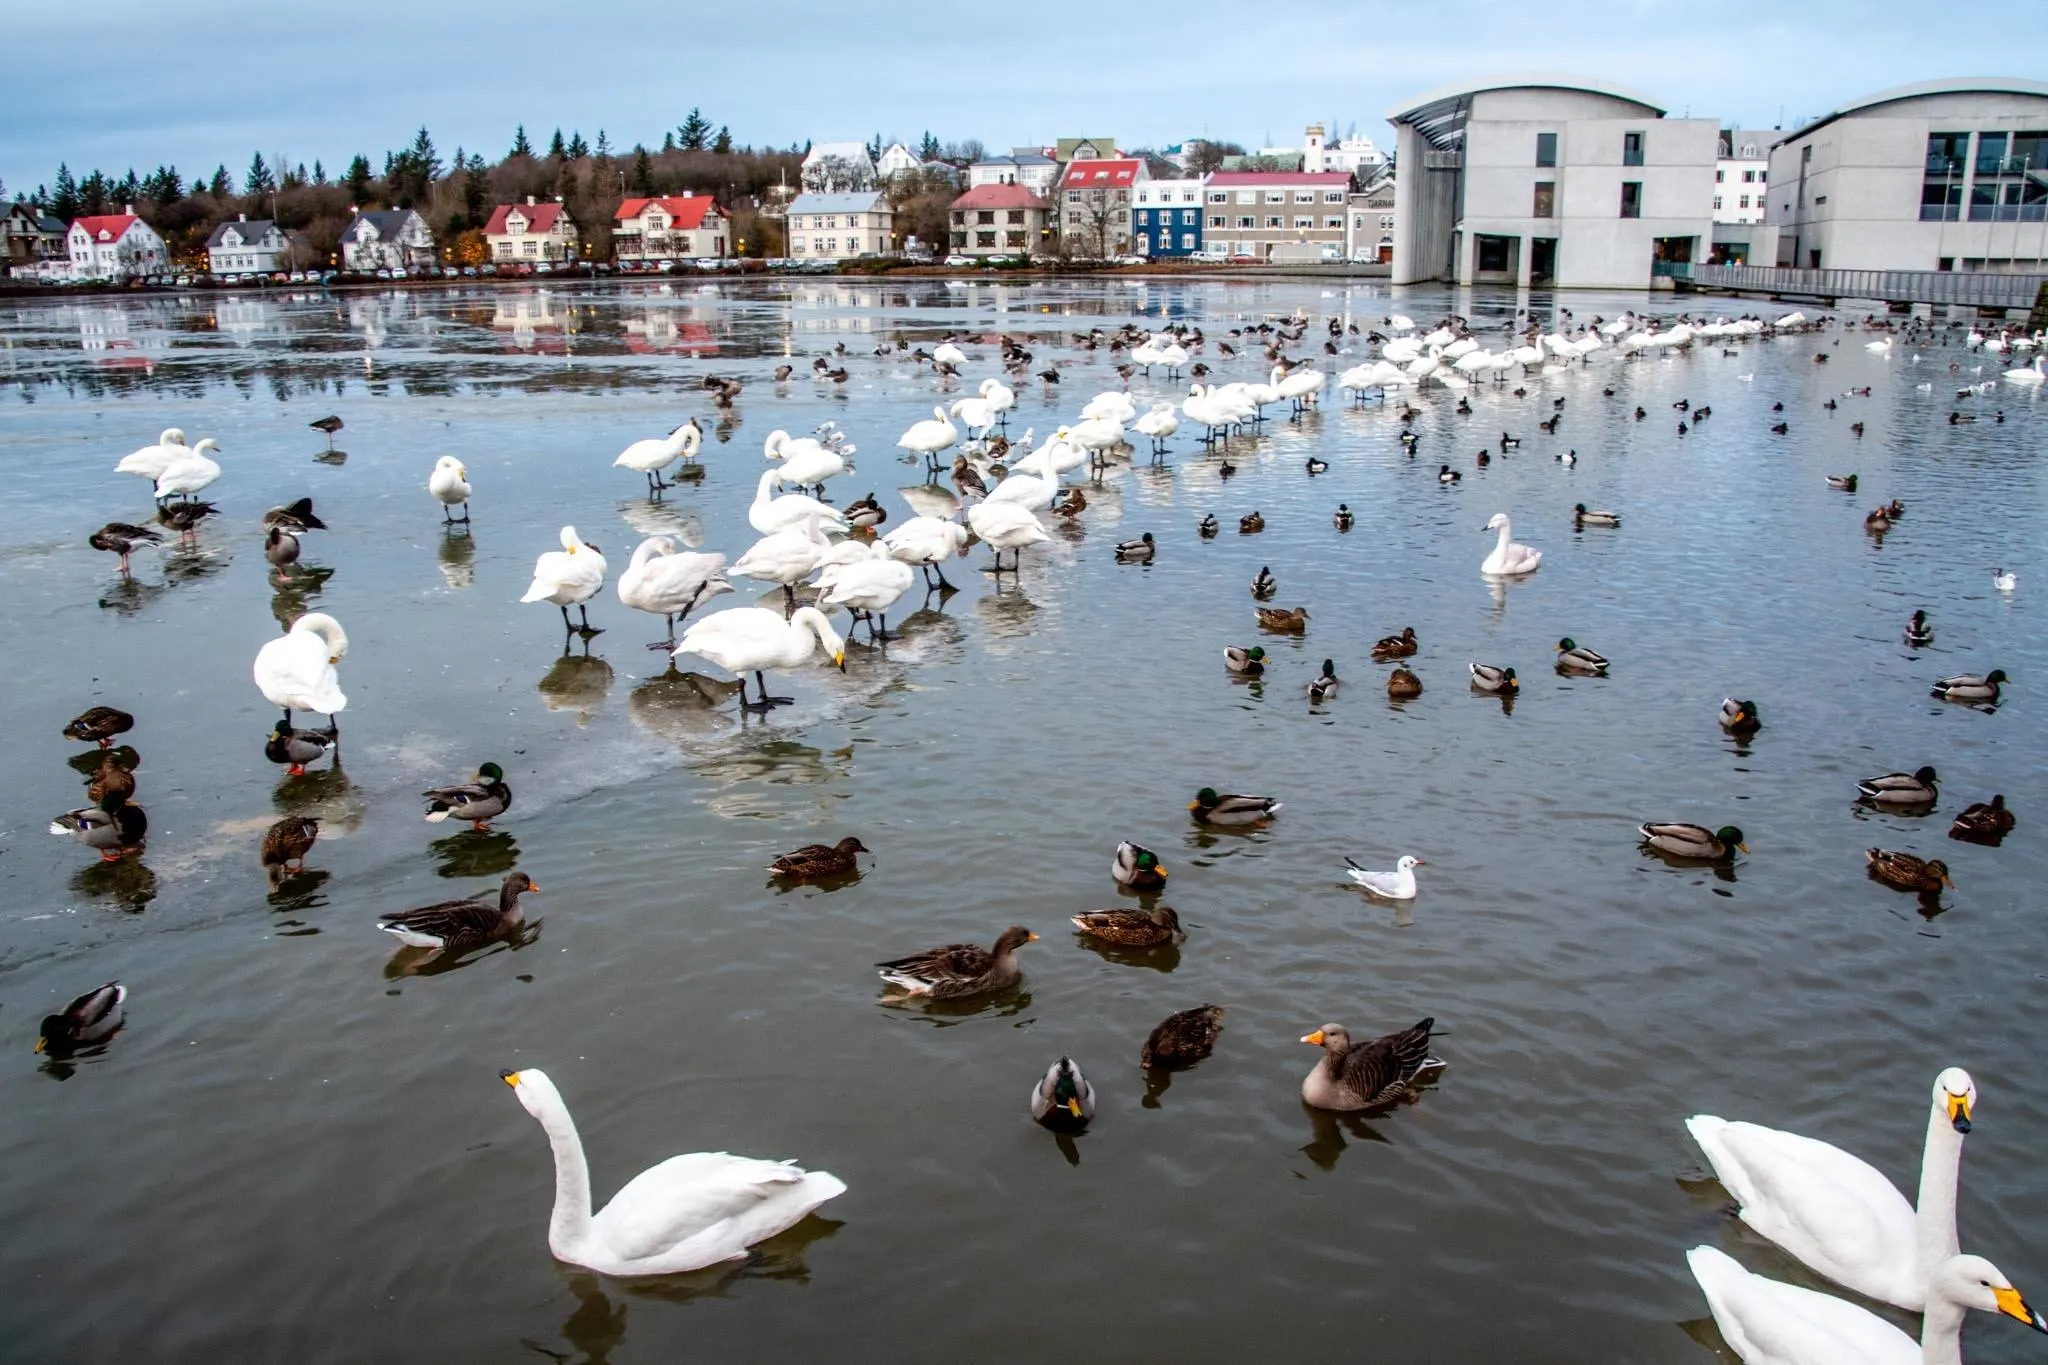 Ducks and swans on the Tjörnin in front of the Reykjavik City Hall